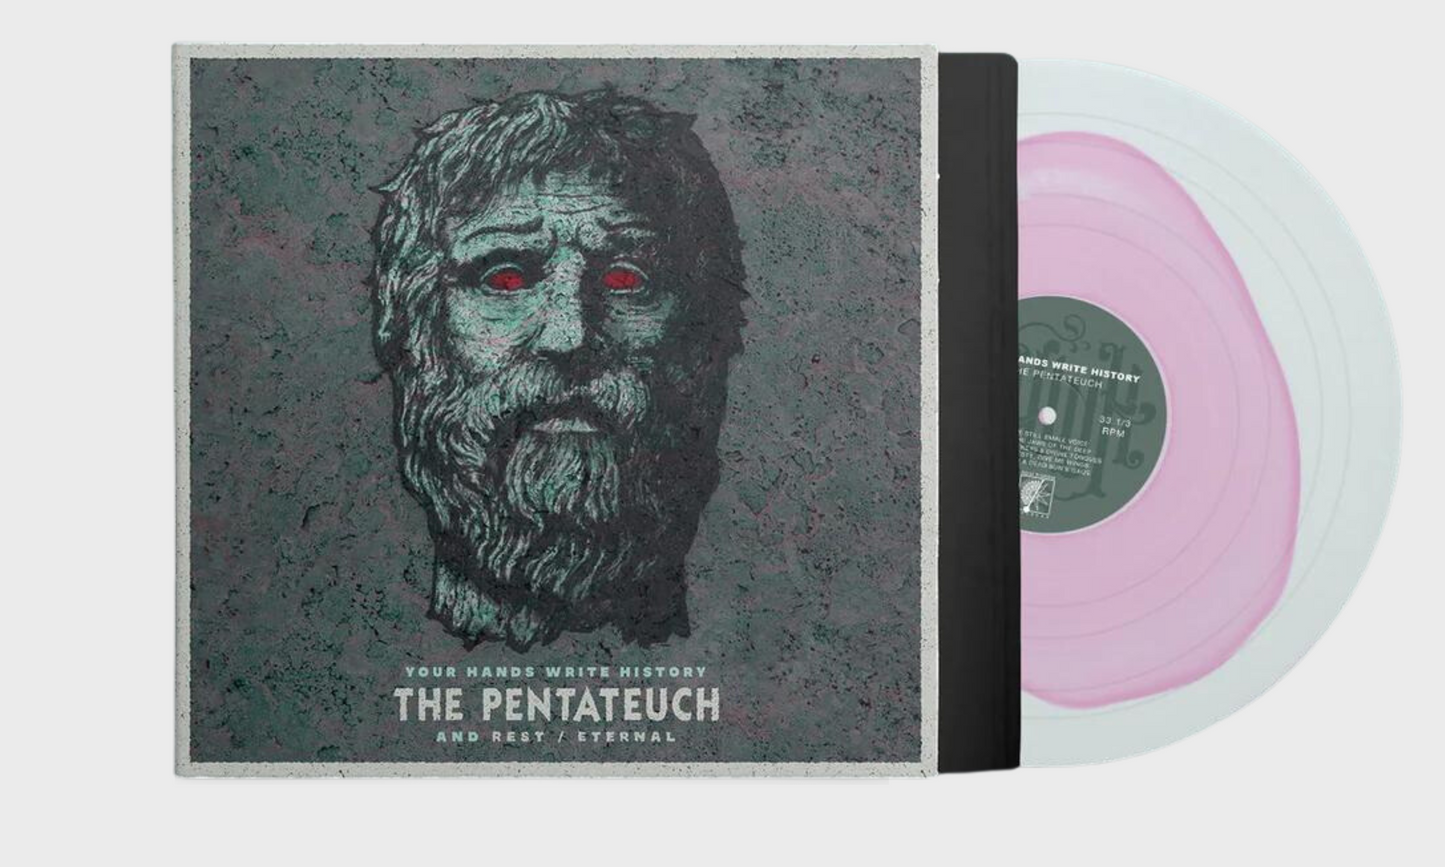 Your Hands Write History - The Pentateuch & Rest / Eternal - 12” LP